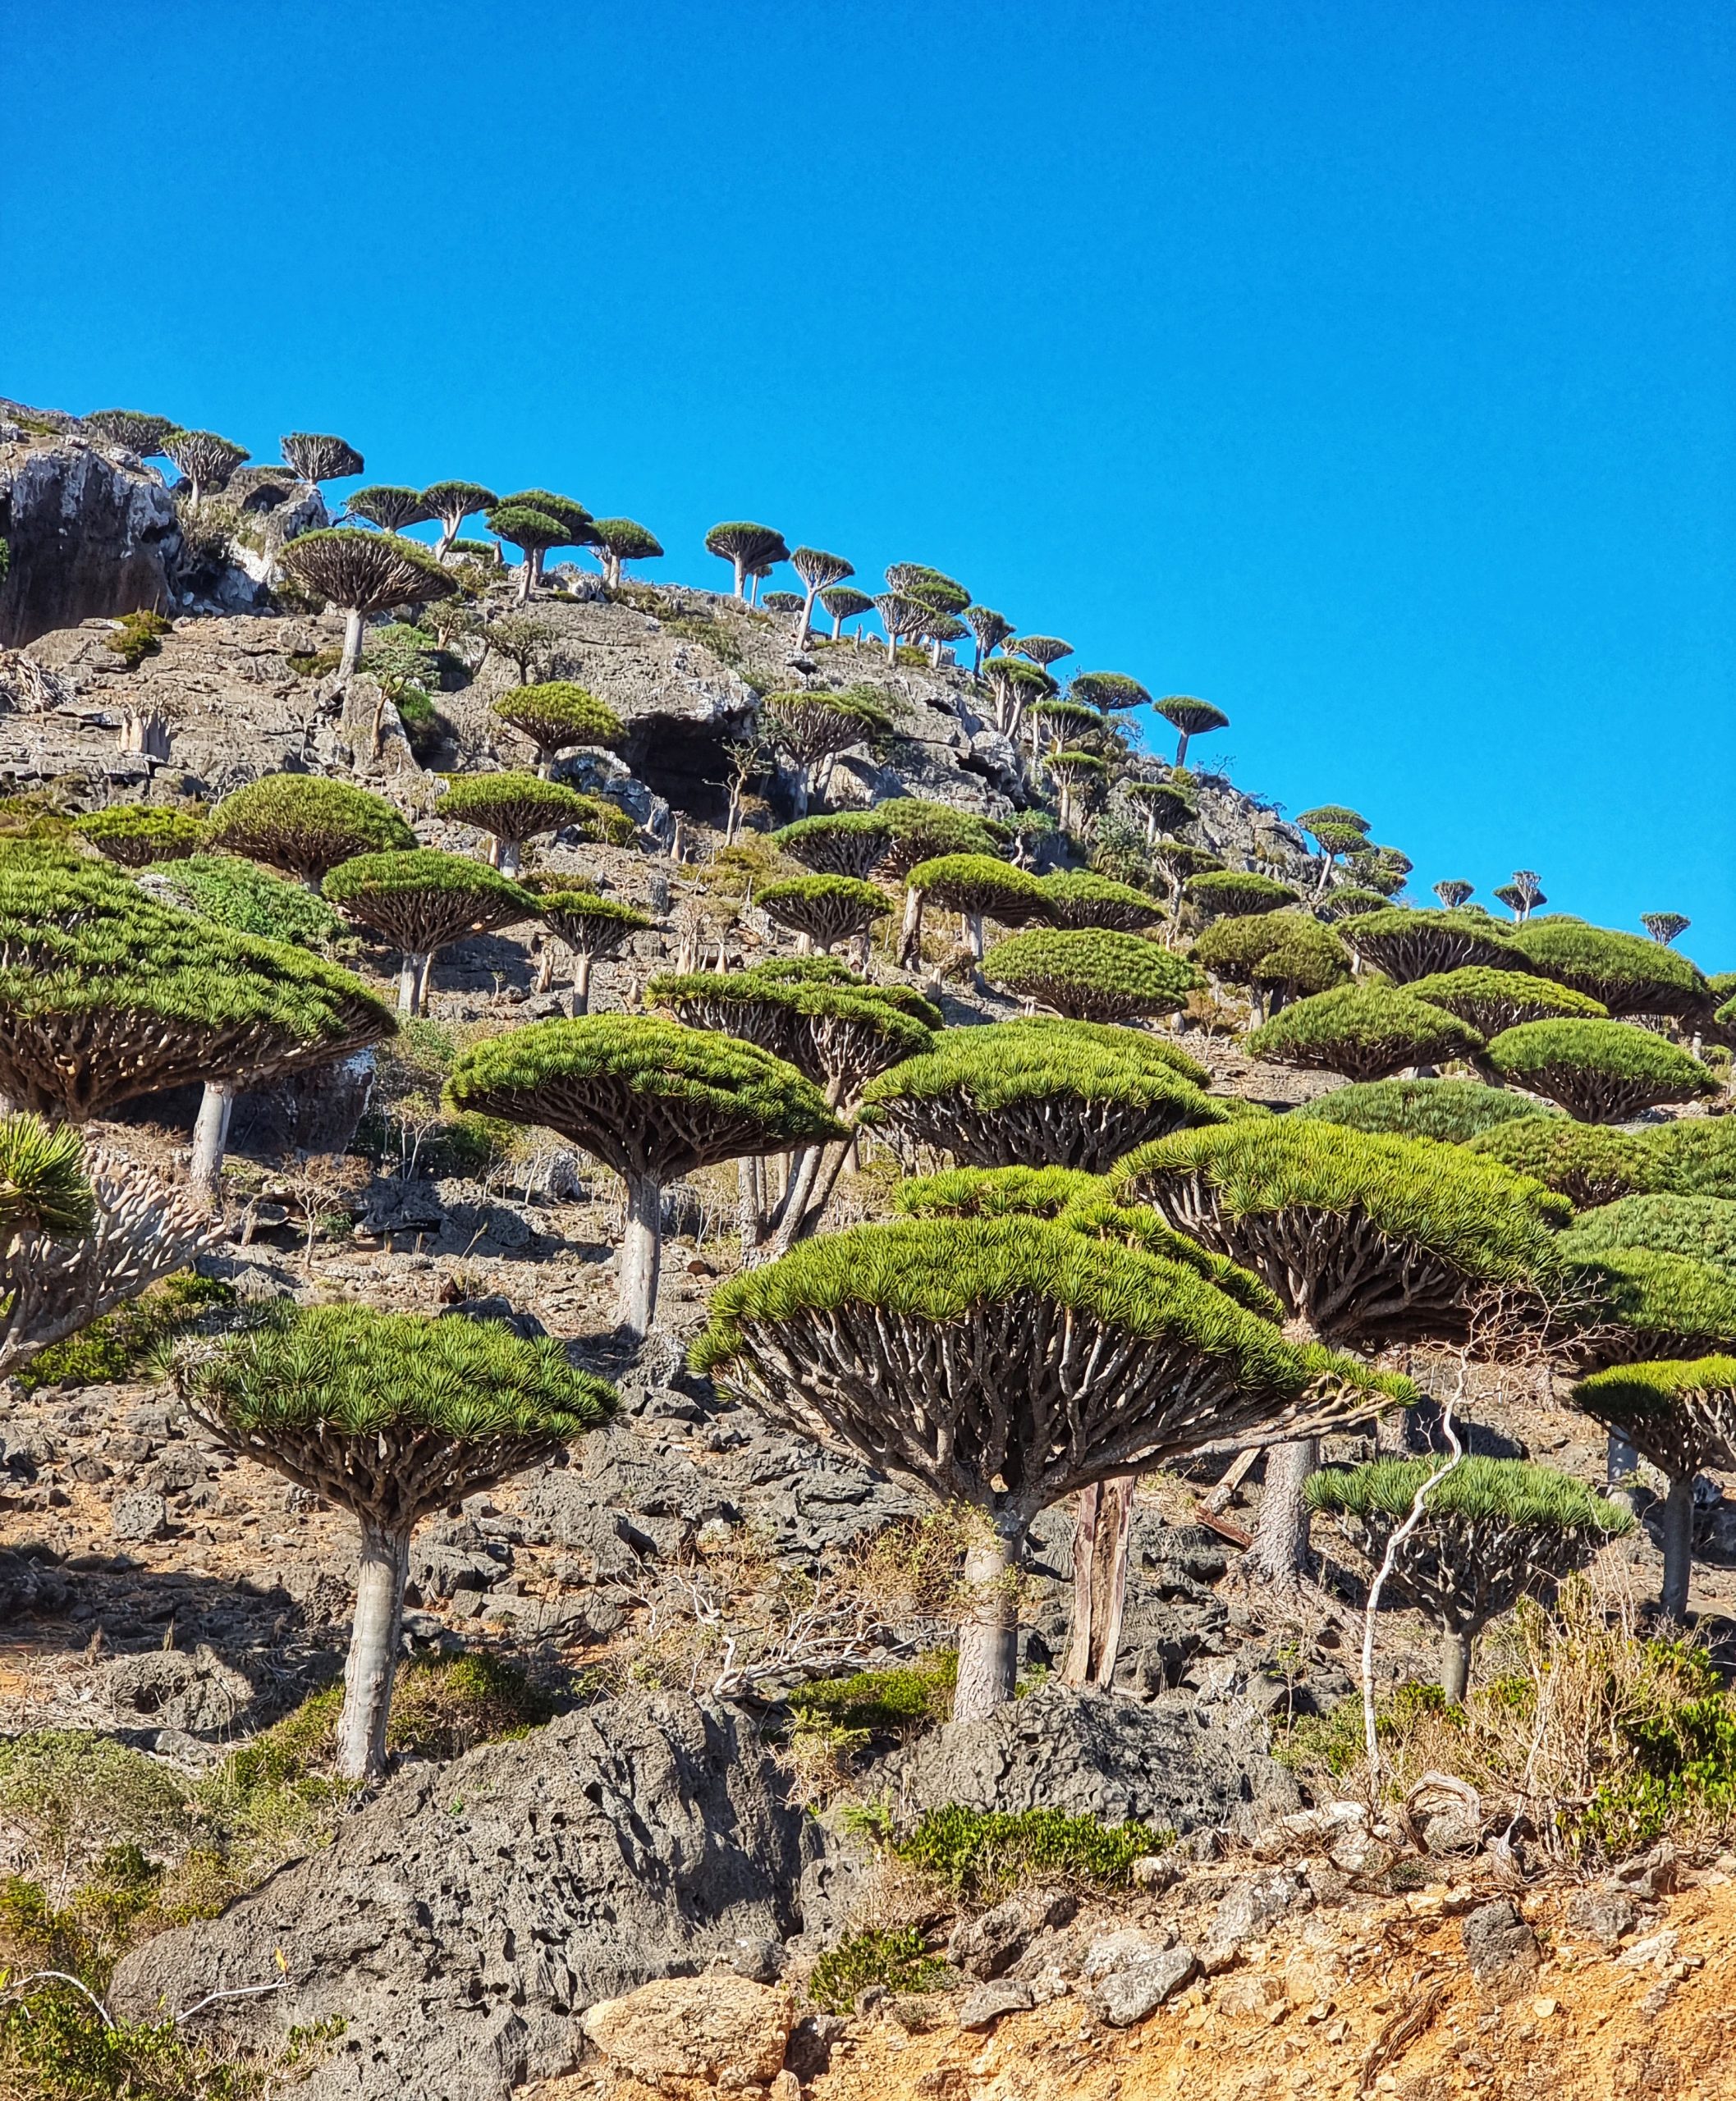 A forest of Dragon Blood trees in Socotra